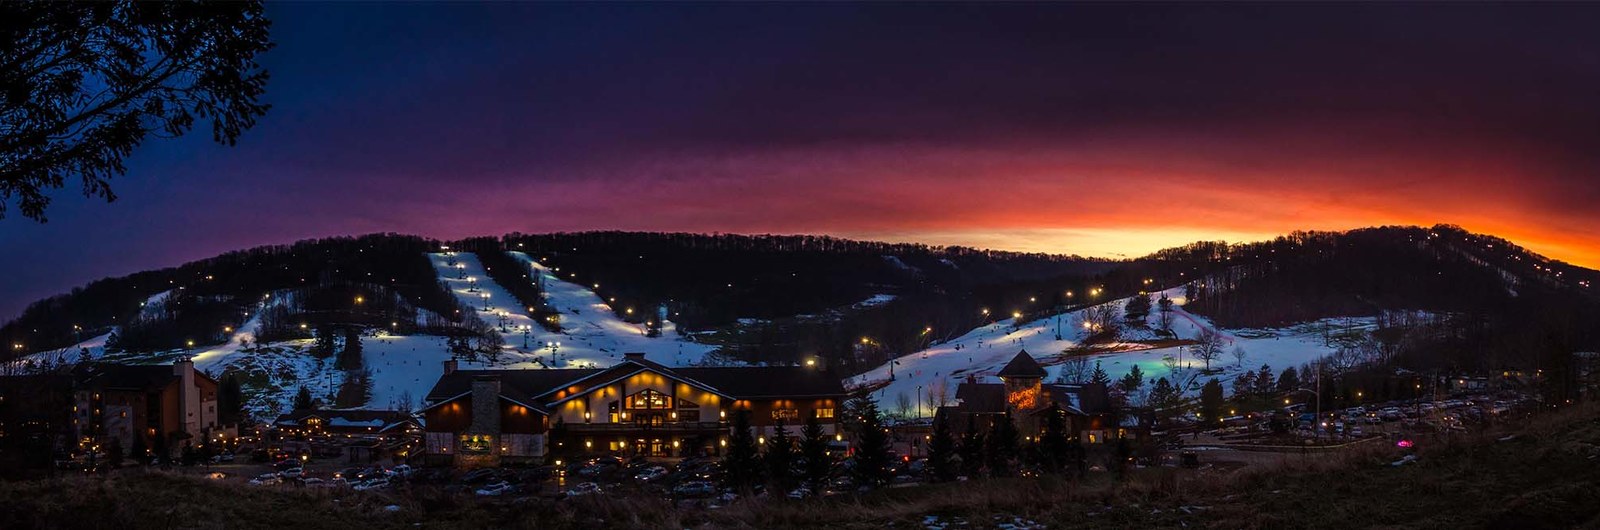 A sunset shot of the resort center in the winter.